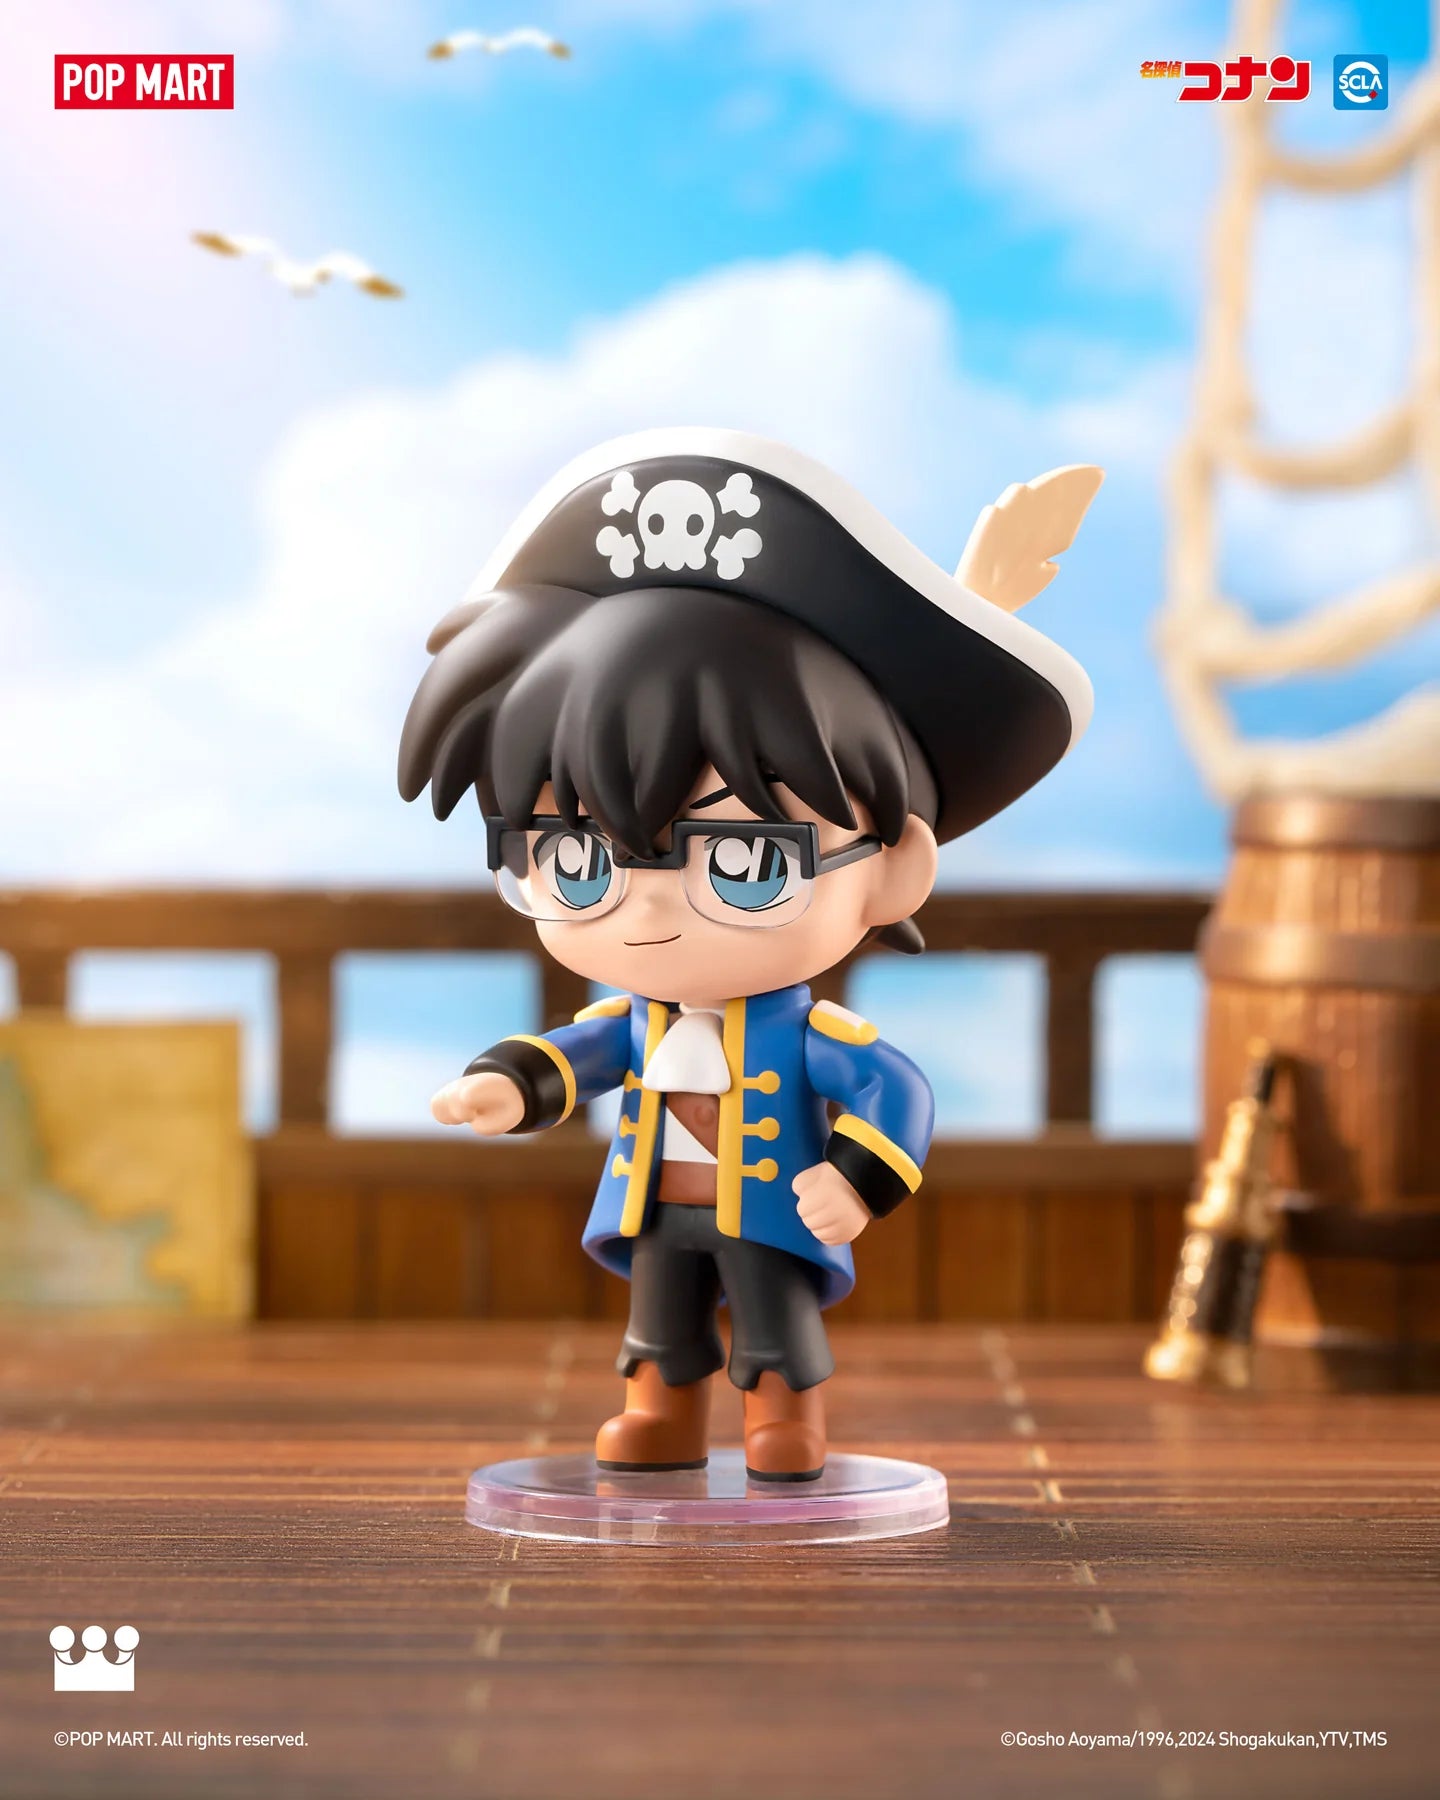 Detective Conan Carnival Blind Box Series: a toy figurine of a pirate boy with a skull and crossbones, part of a mystery-themed collection.